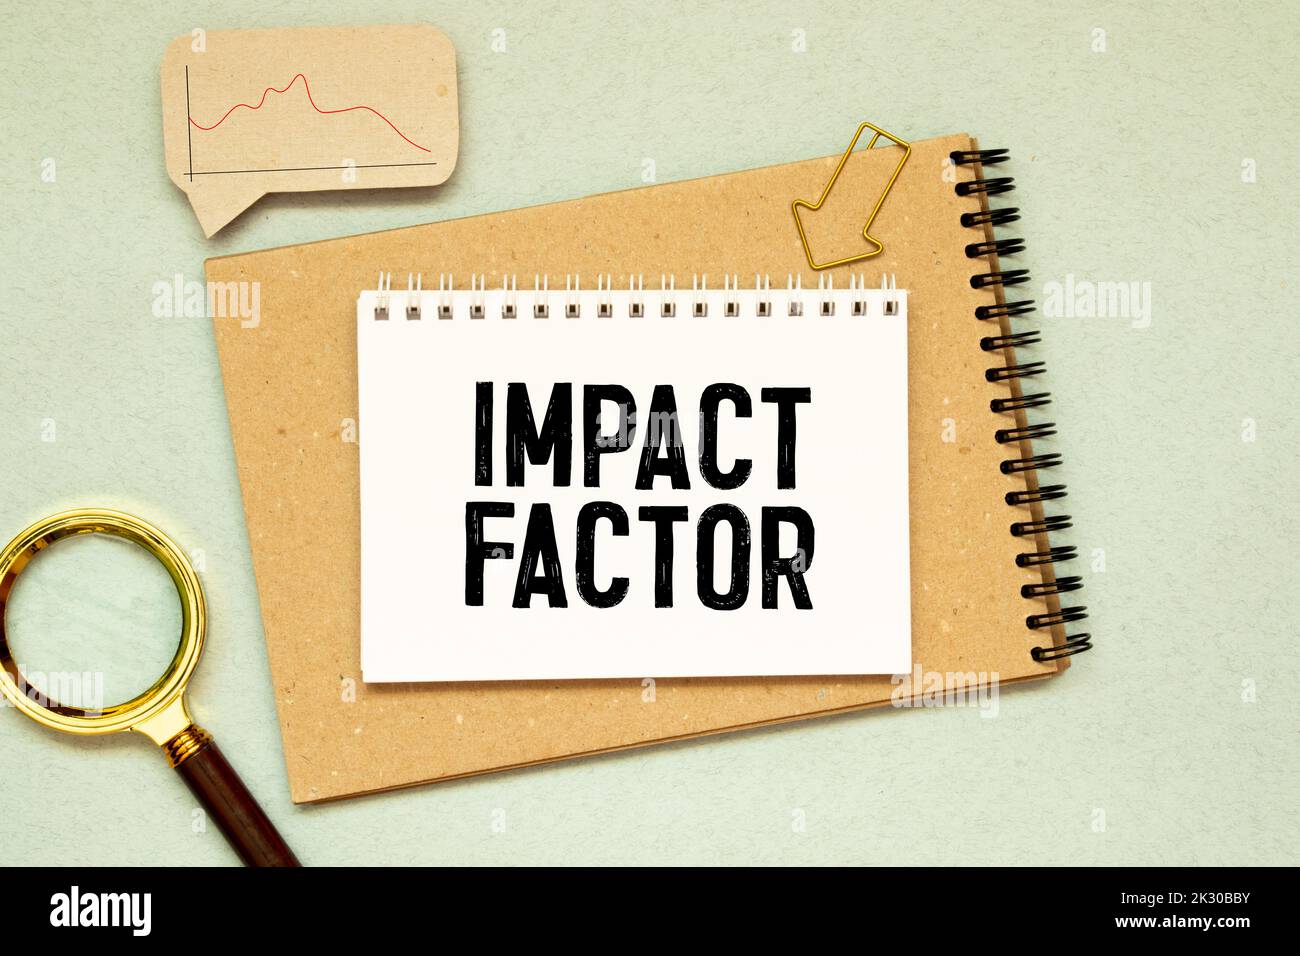 IMPACT FACTOR text written on sticky with pencil and glasses. Stock Photo